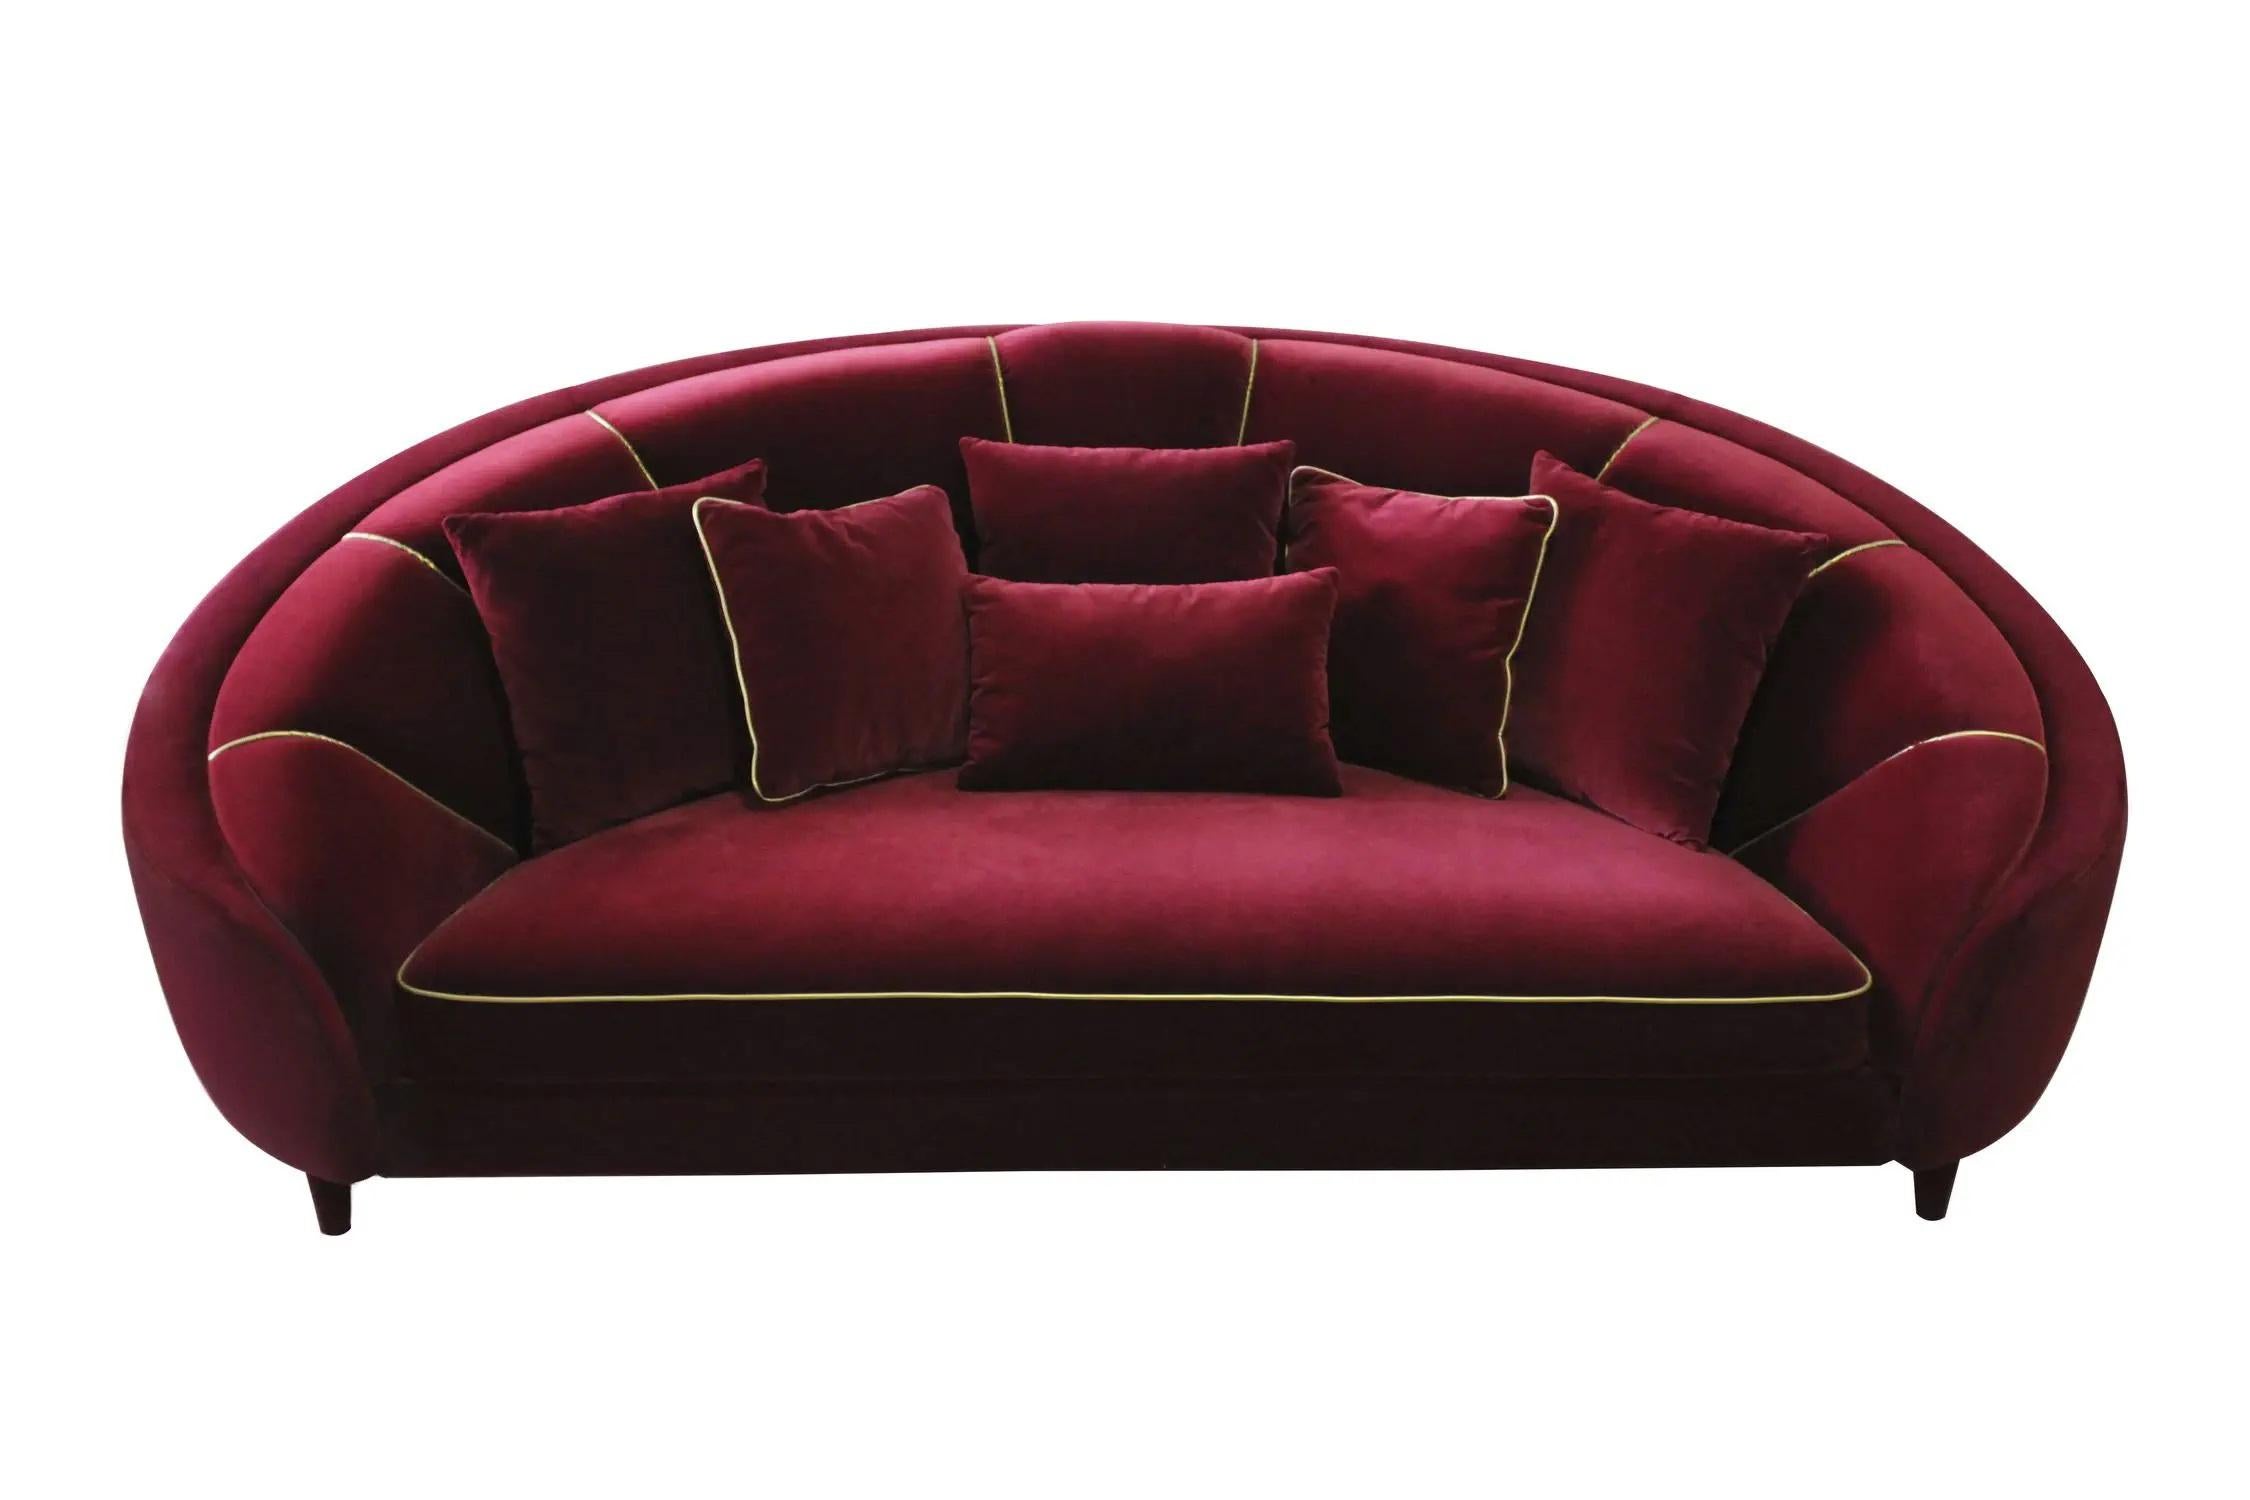 Handcrafted curved sofa inspired by the art deco luxurious style with fluid curves and detailed with gold piping offers a delicate touch. 
Contact us to enquire about COM/COL production, requirements and material shipping instructions.
Please